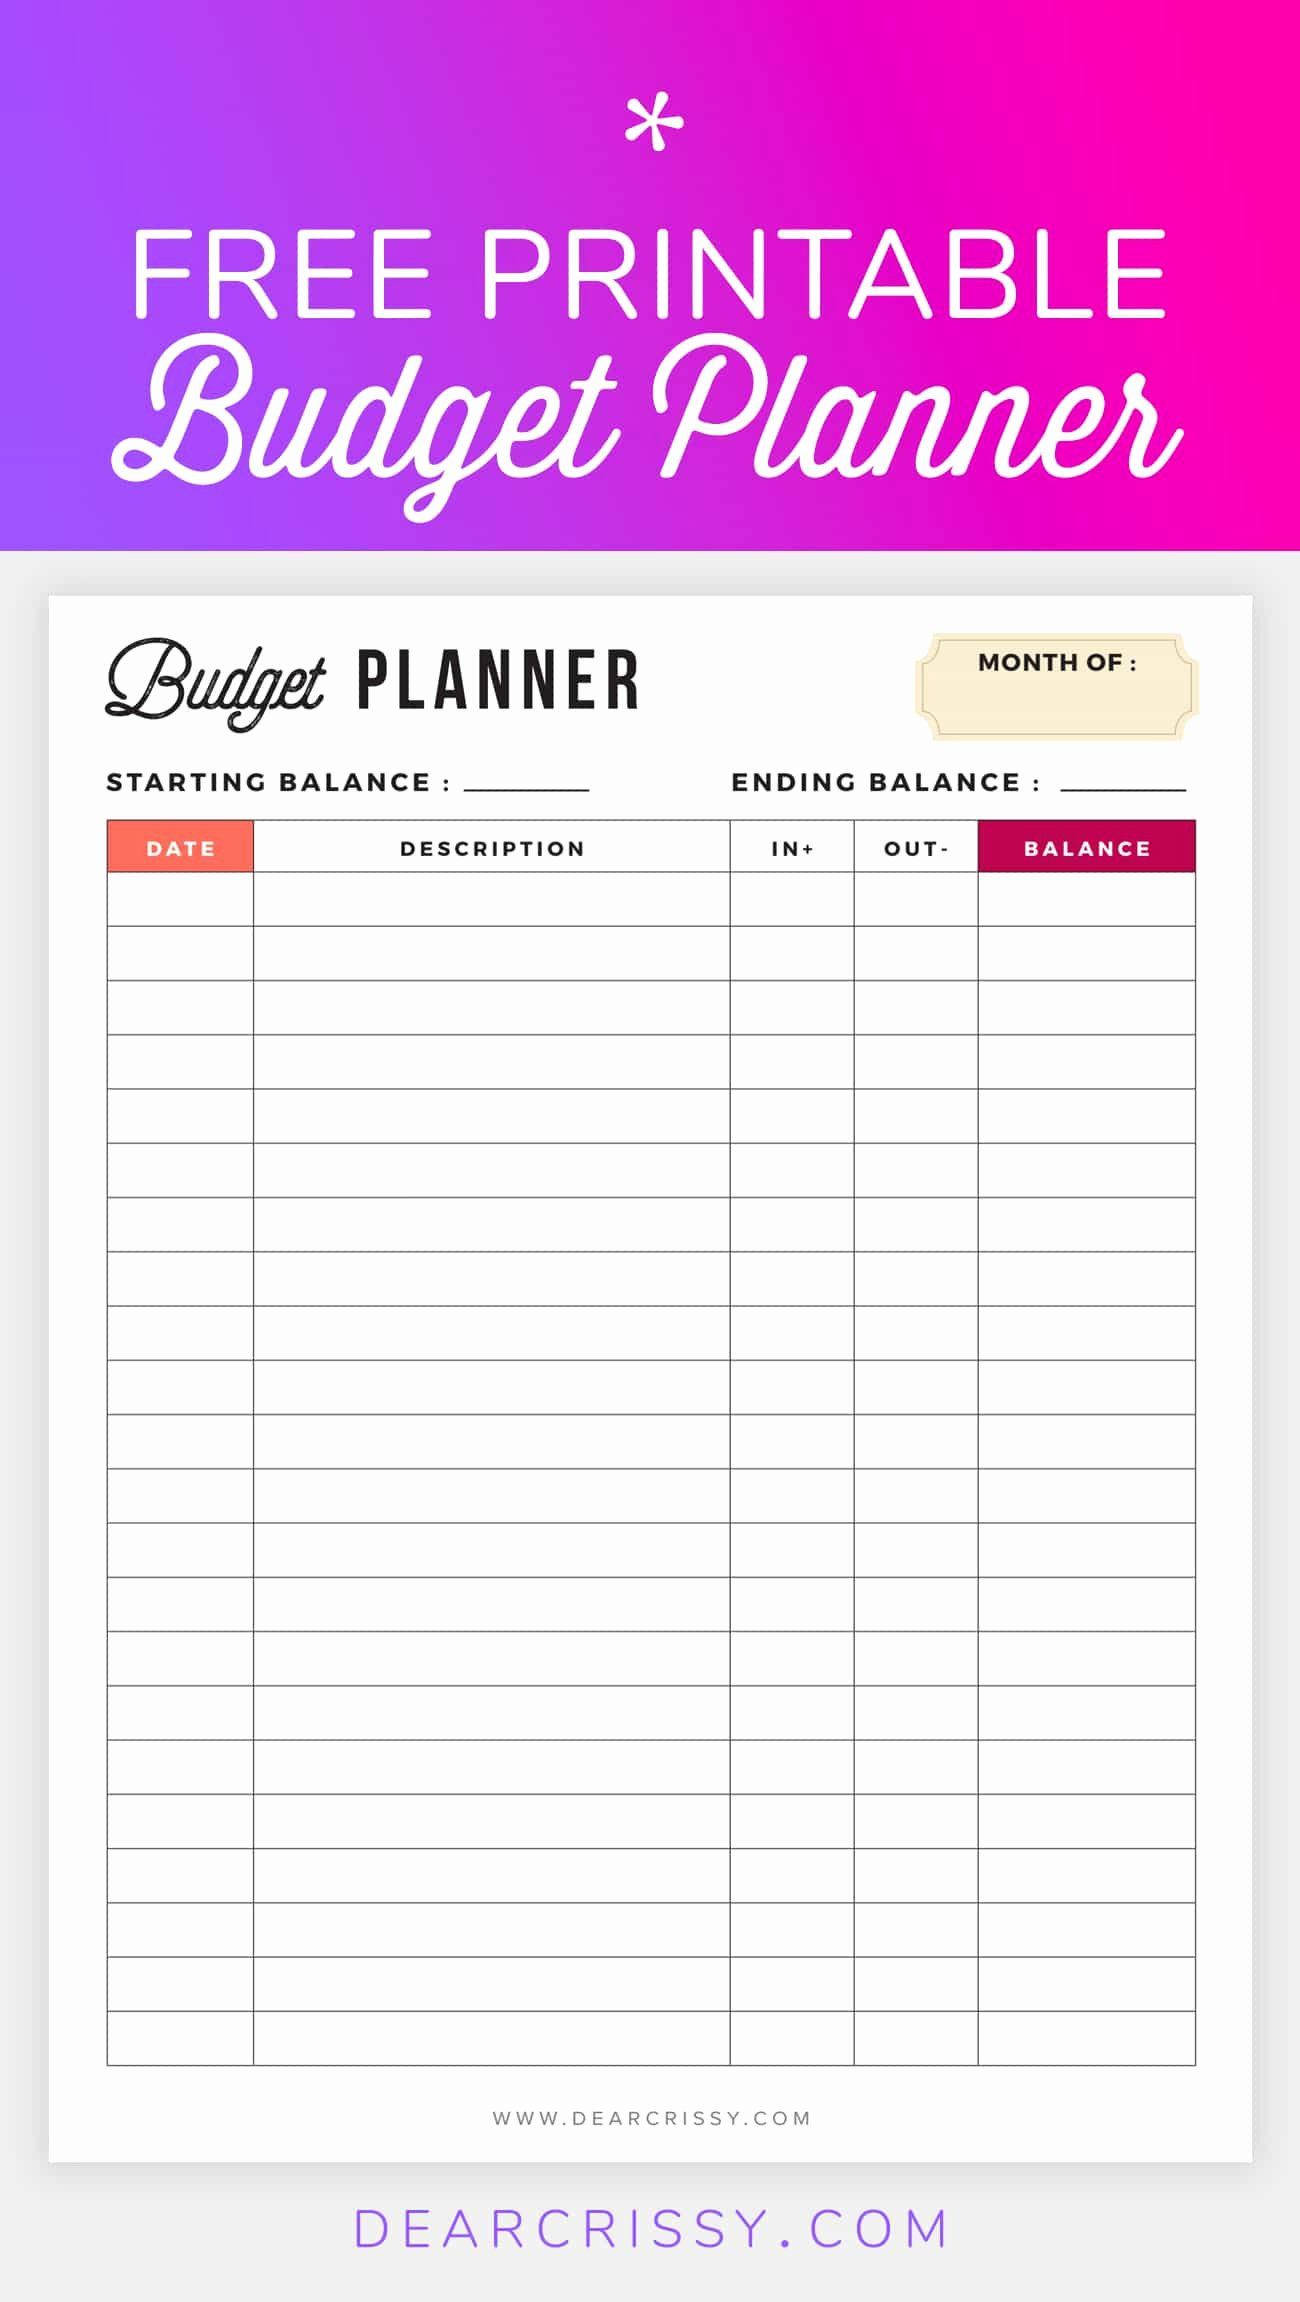 Monthly Budget Planner Template Lovely Free Bud Planner Printable pour Budget Planner Pdf Gratuit